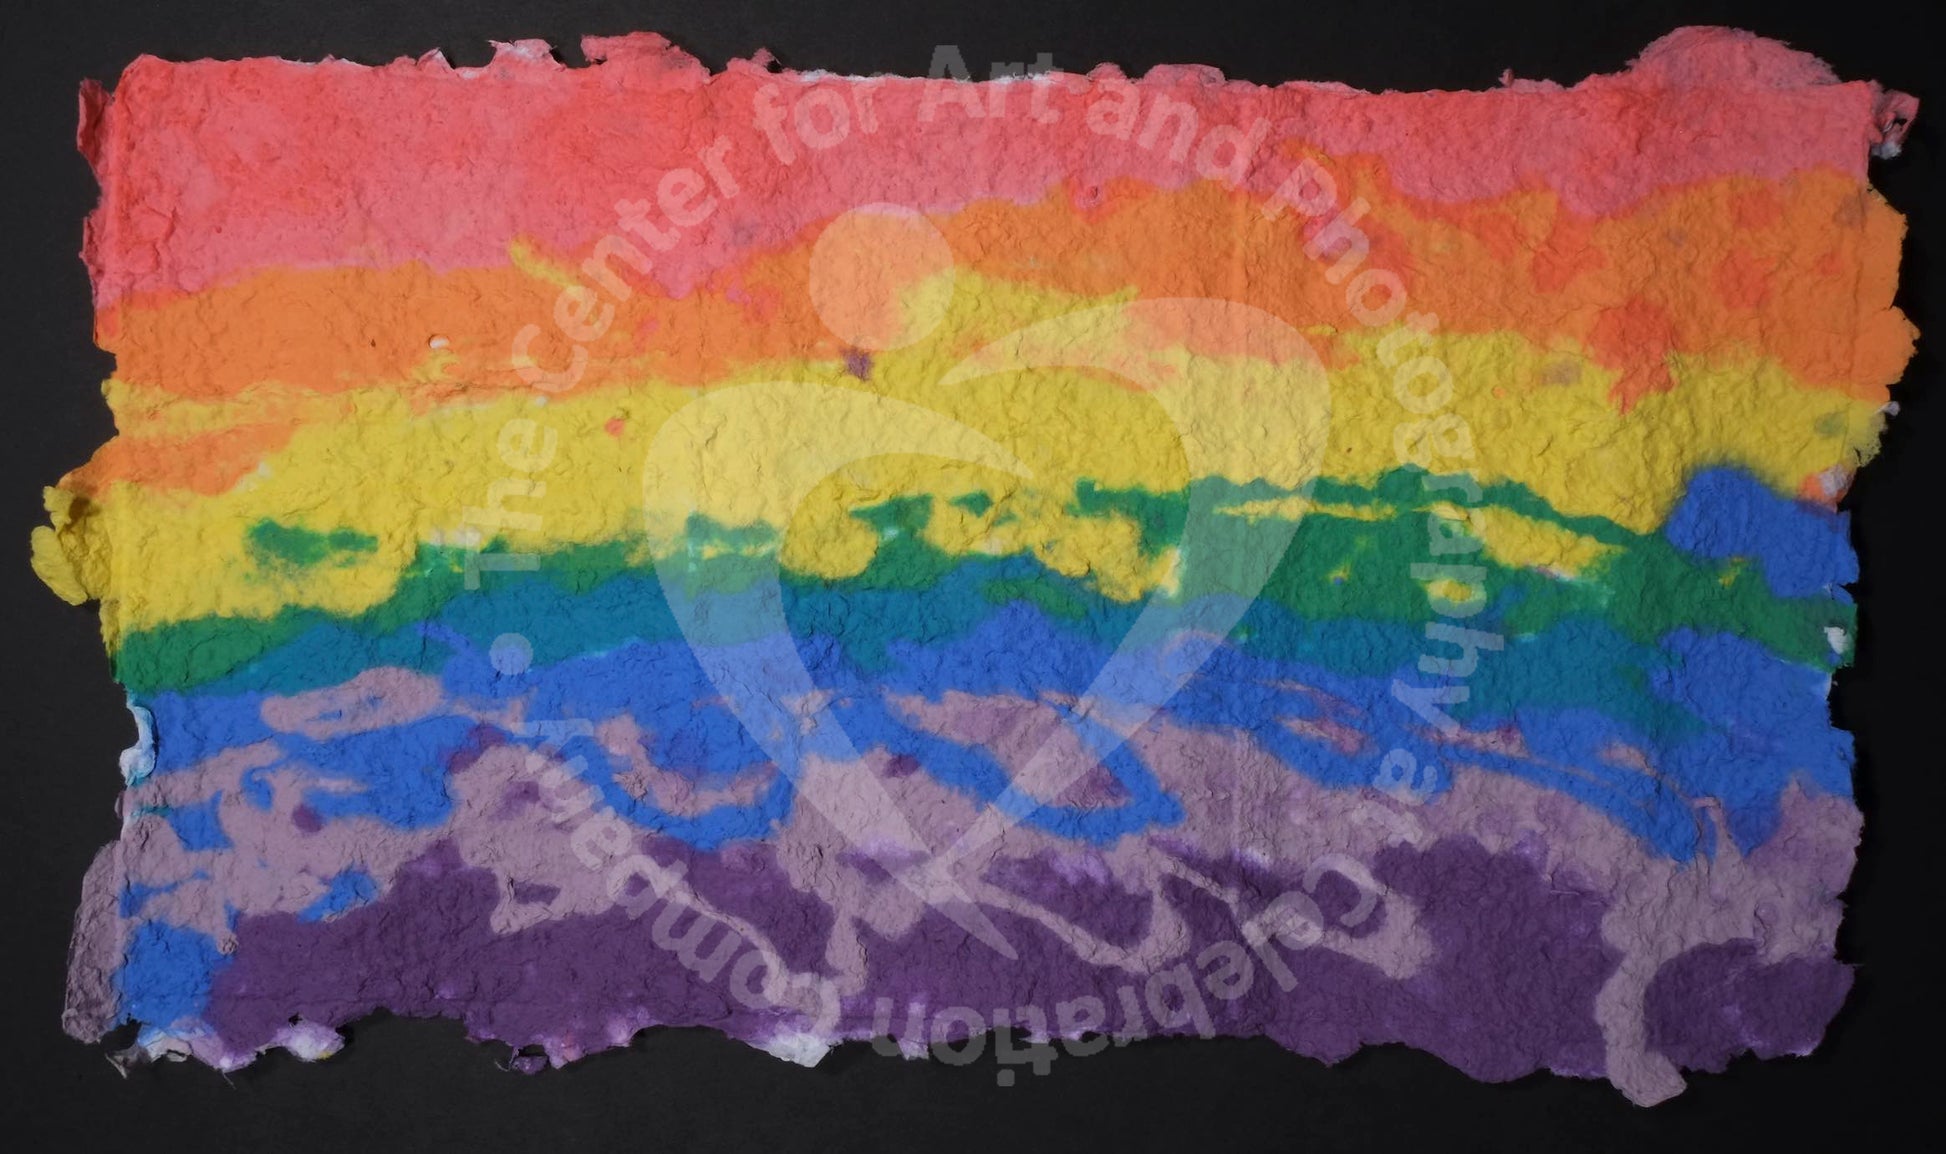 Highly textured handmade paper with horizontal lines of color (starting at the top) red, orange, yellow, green, blue, light purple, and dark purple.